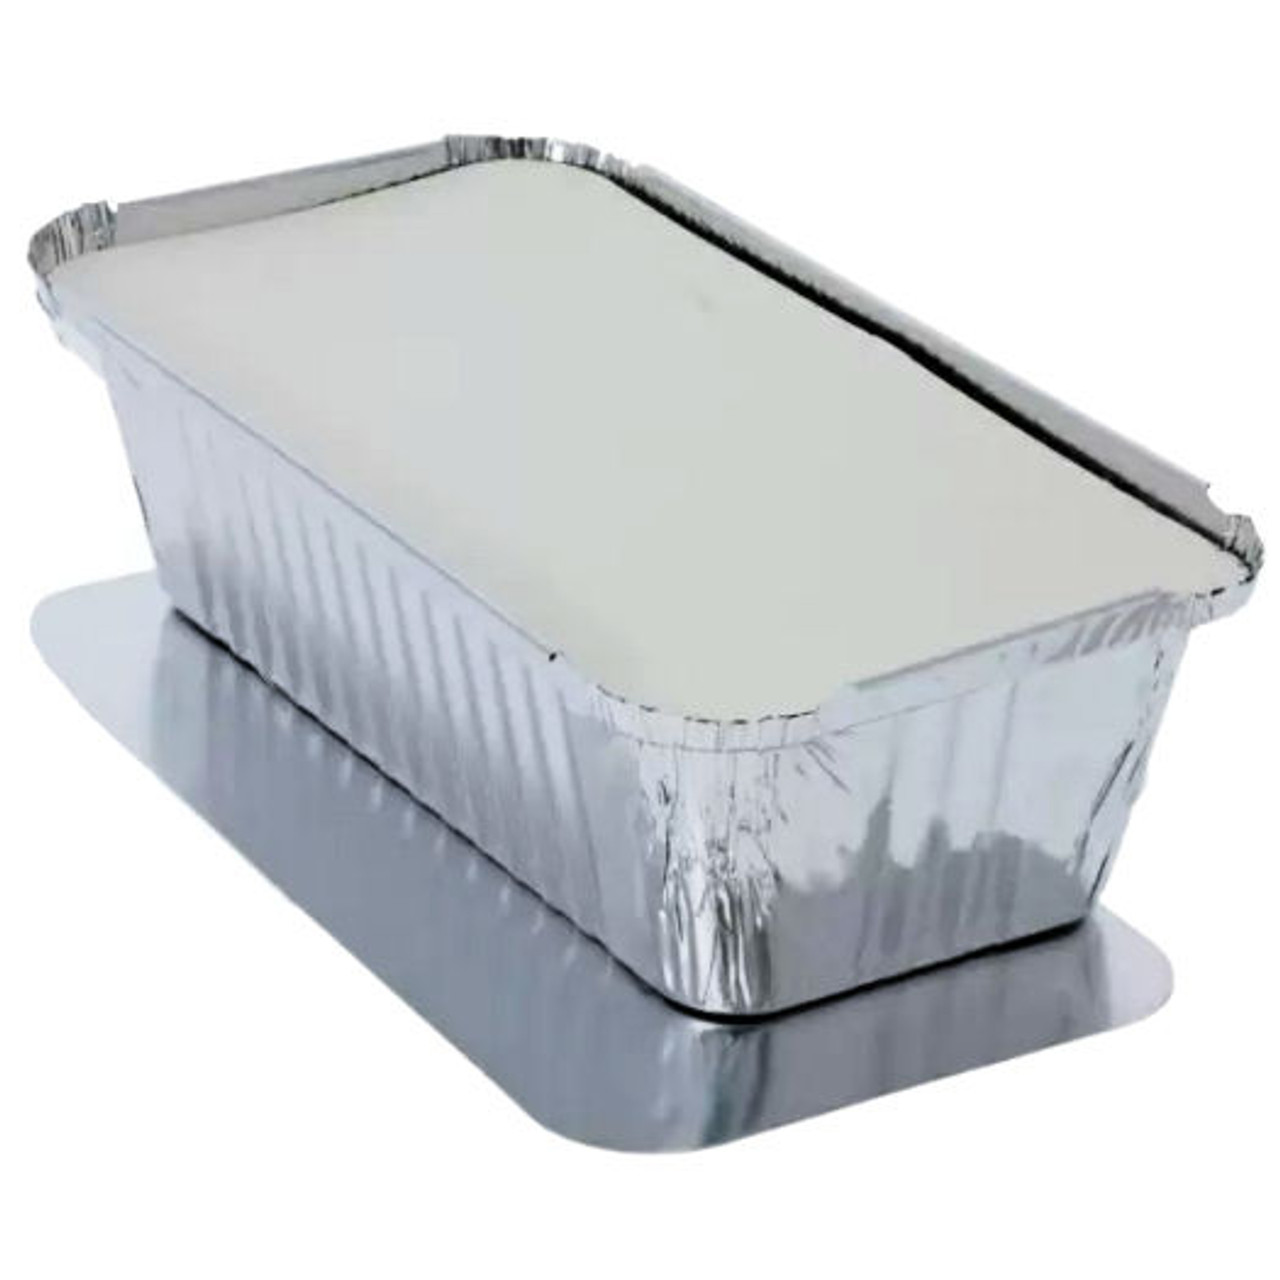 https://cdn11.bigcommerce.com/s-tjx0gy7pkp/images/stencil/1280x1280/products/12301/28996/Gastronorm_foil_container_third_size_and_lid__45490.1663507384.jpg?c=2